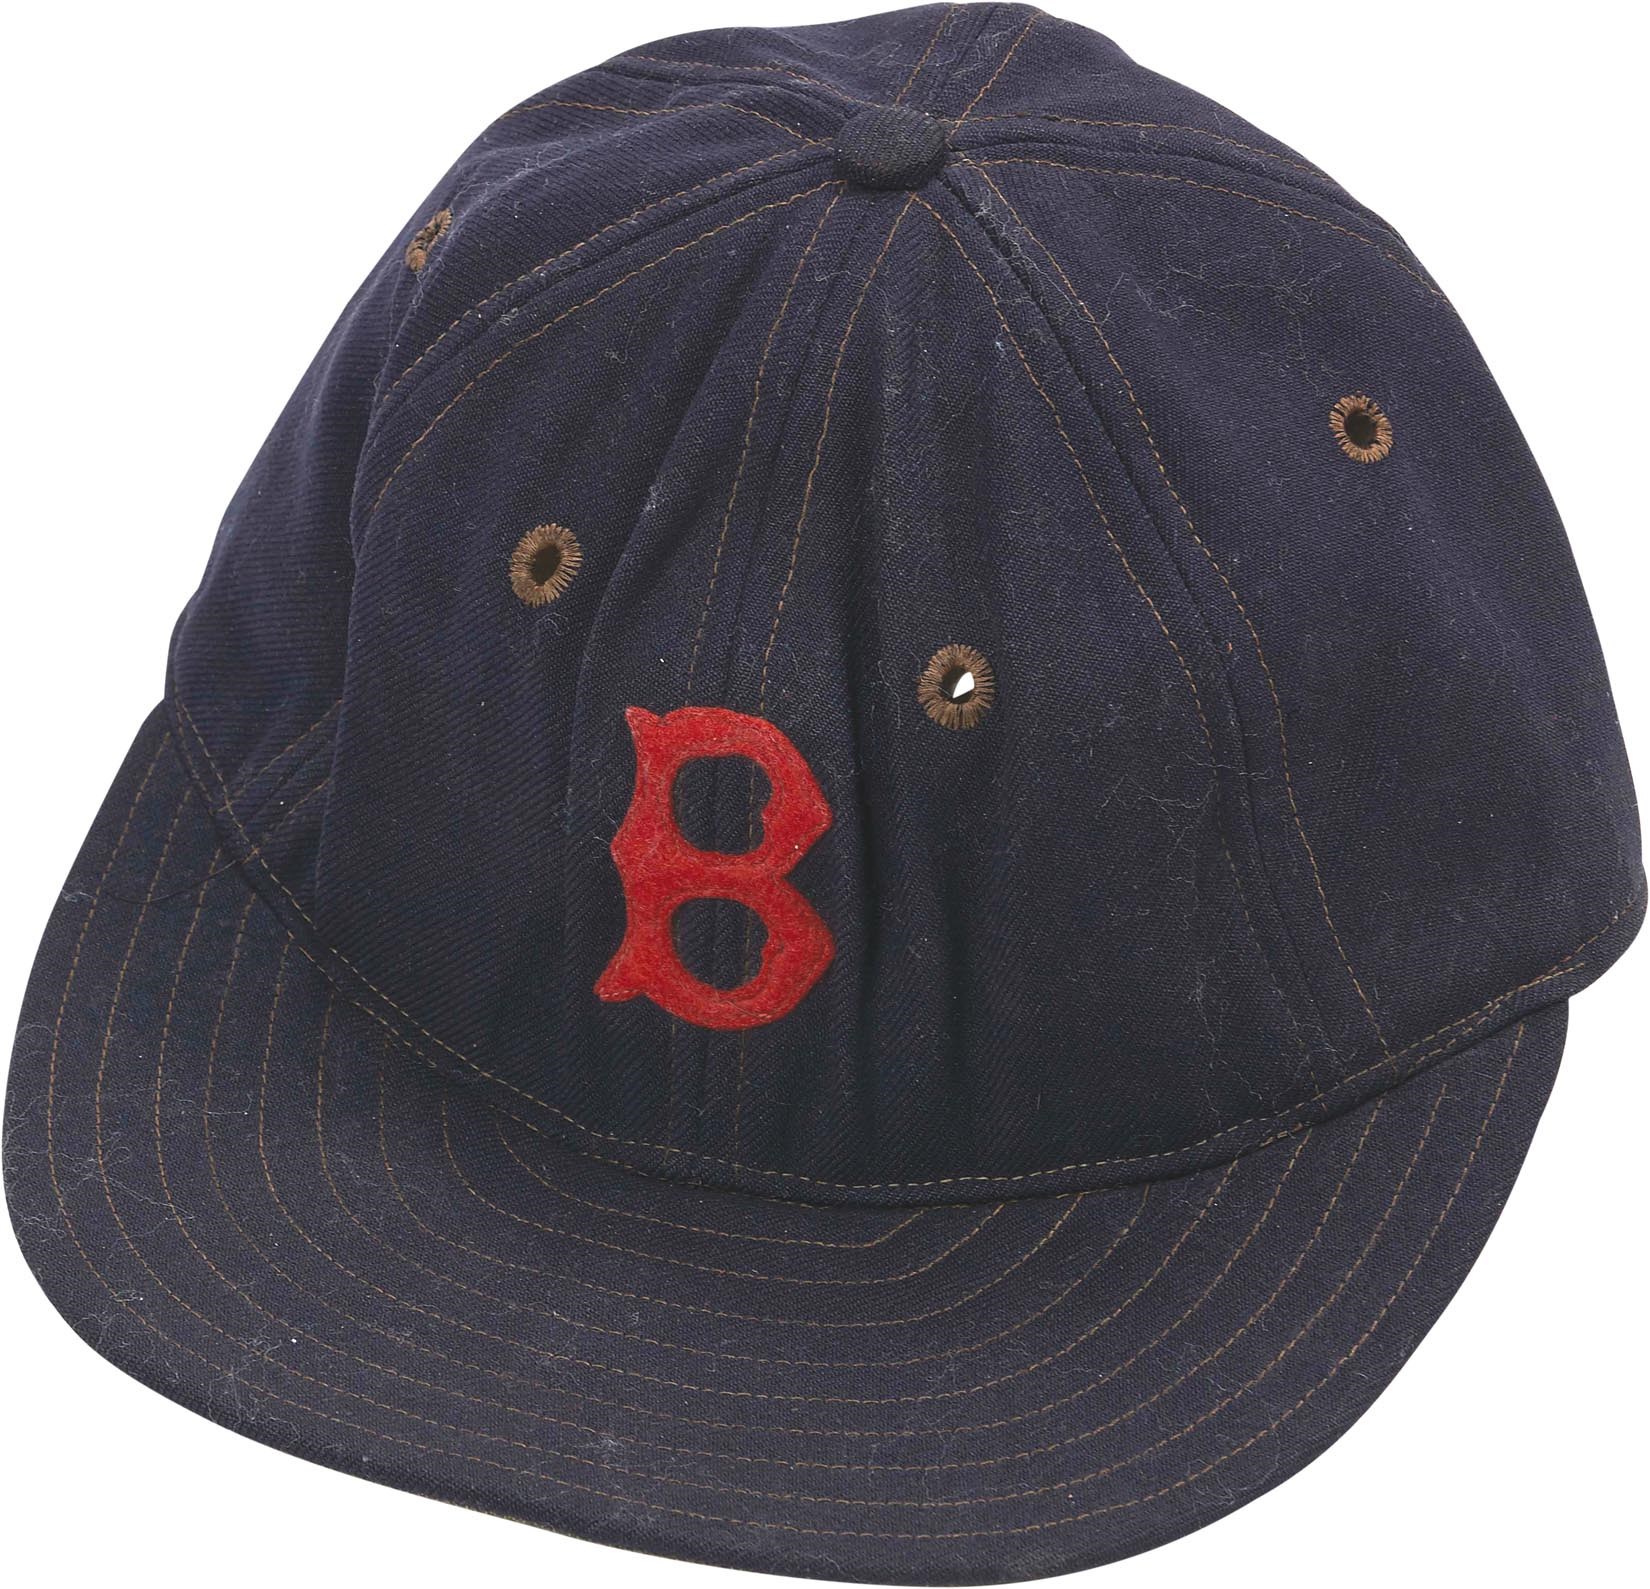 - Important 1941 Ted Williams Game Worn Red Sox Cap